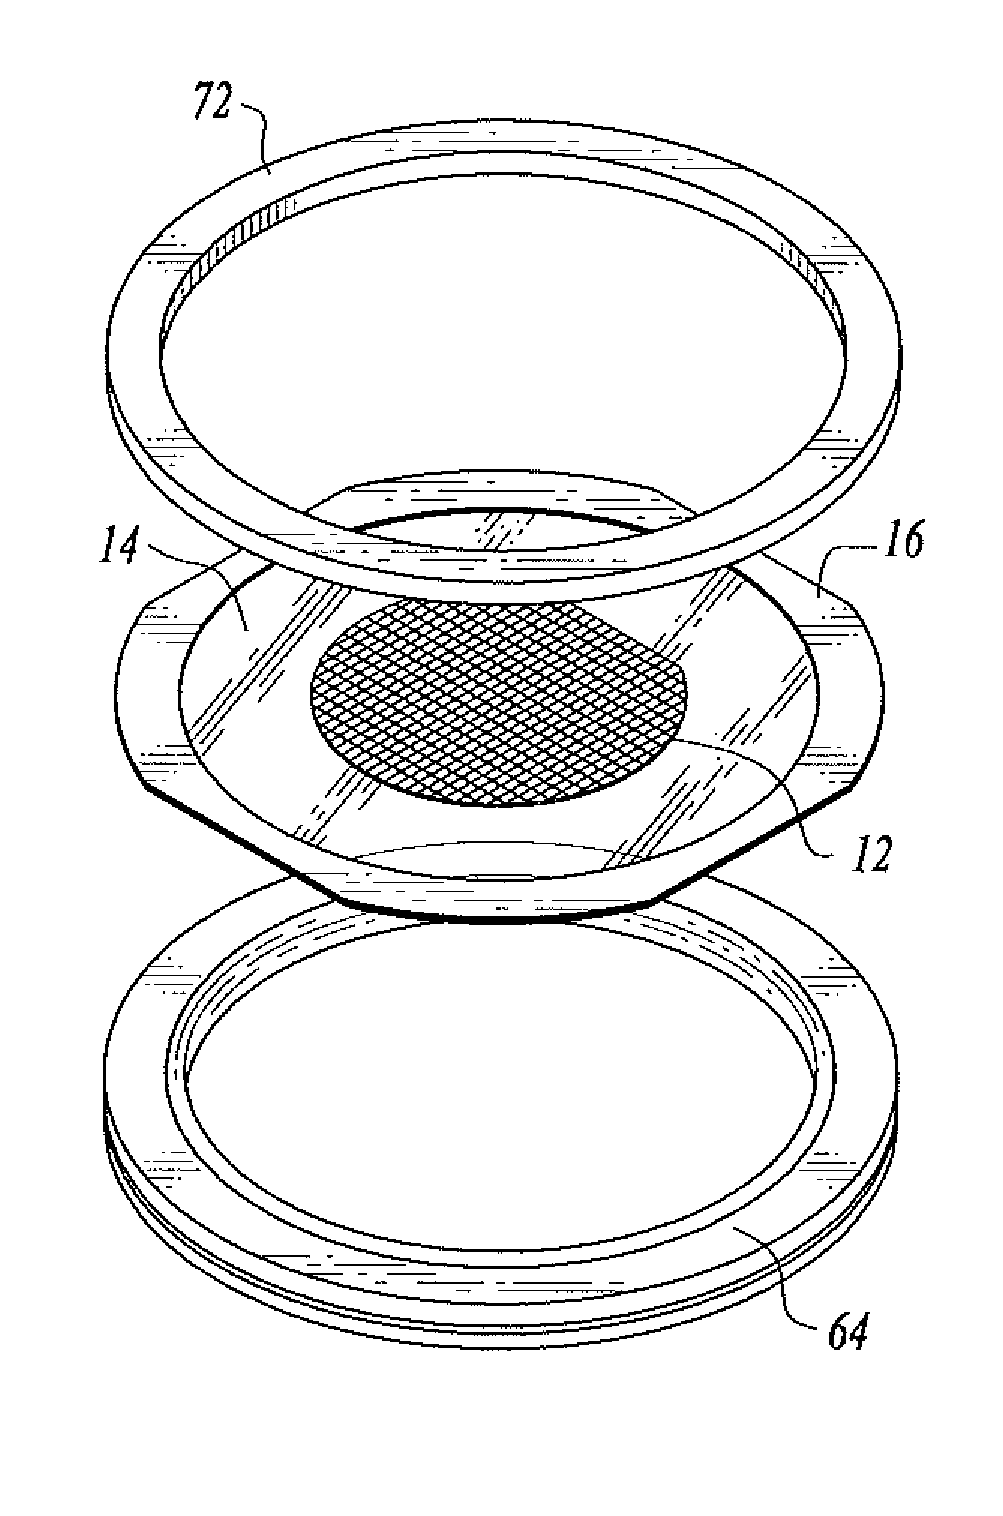 System for separating devices from a semiconductor wafer